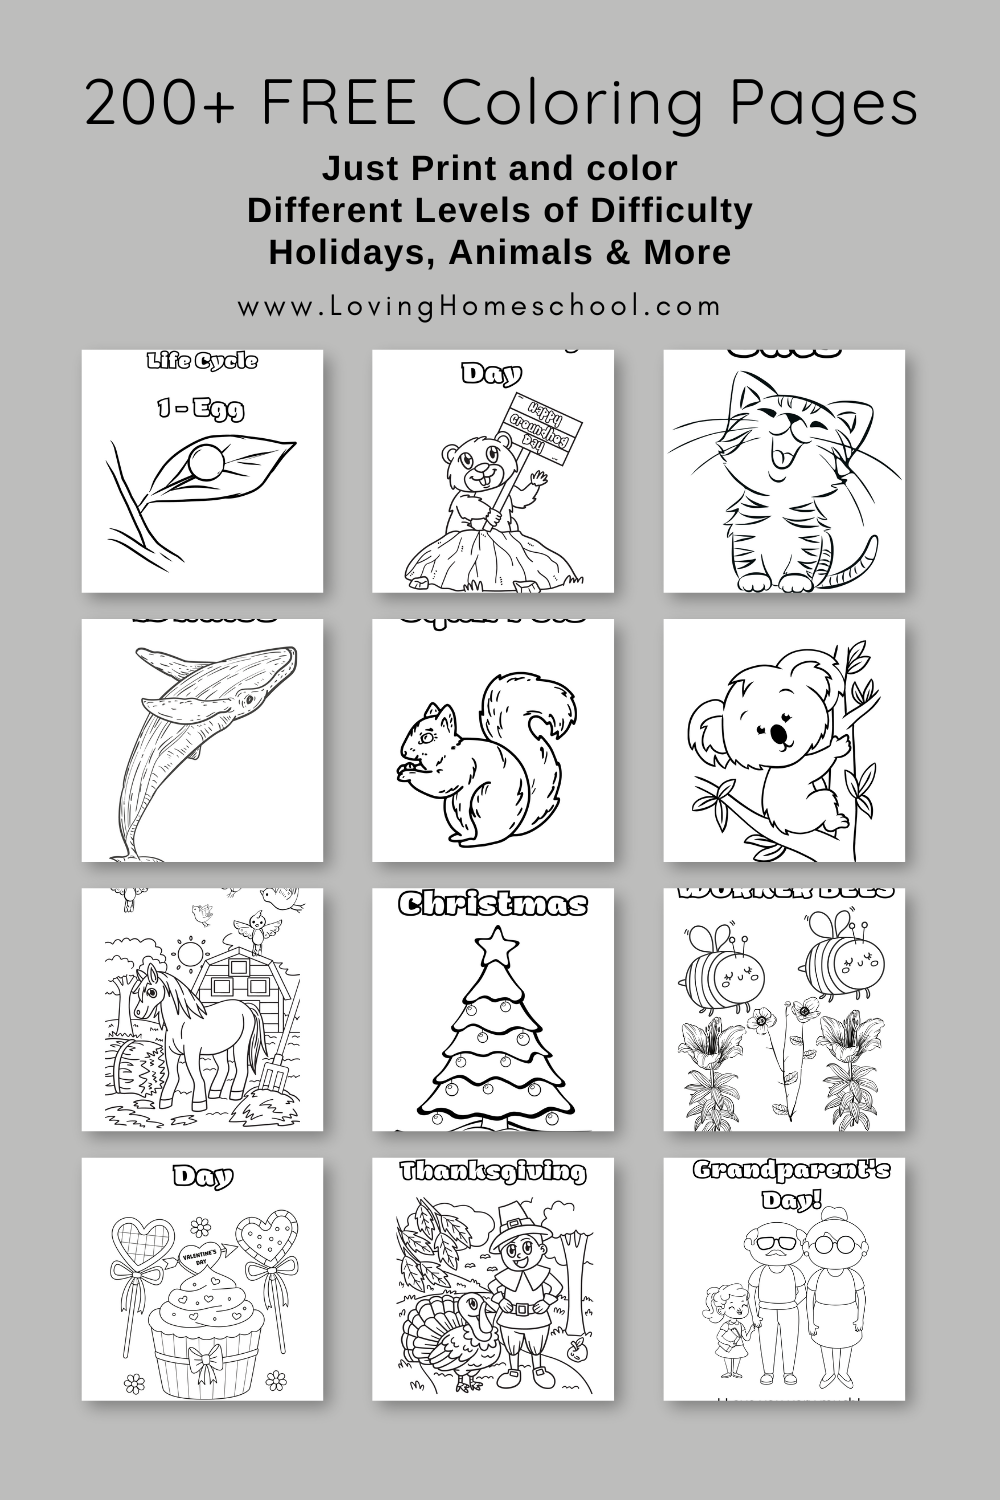 200+ FREE Coloring Pages Pinterest Pin